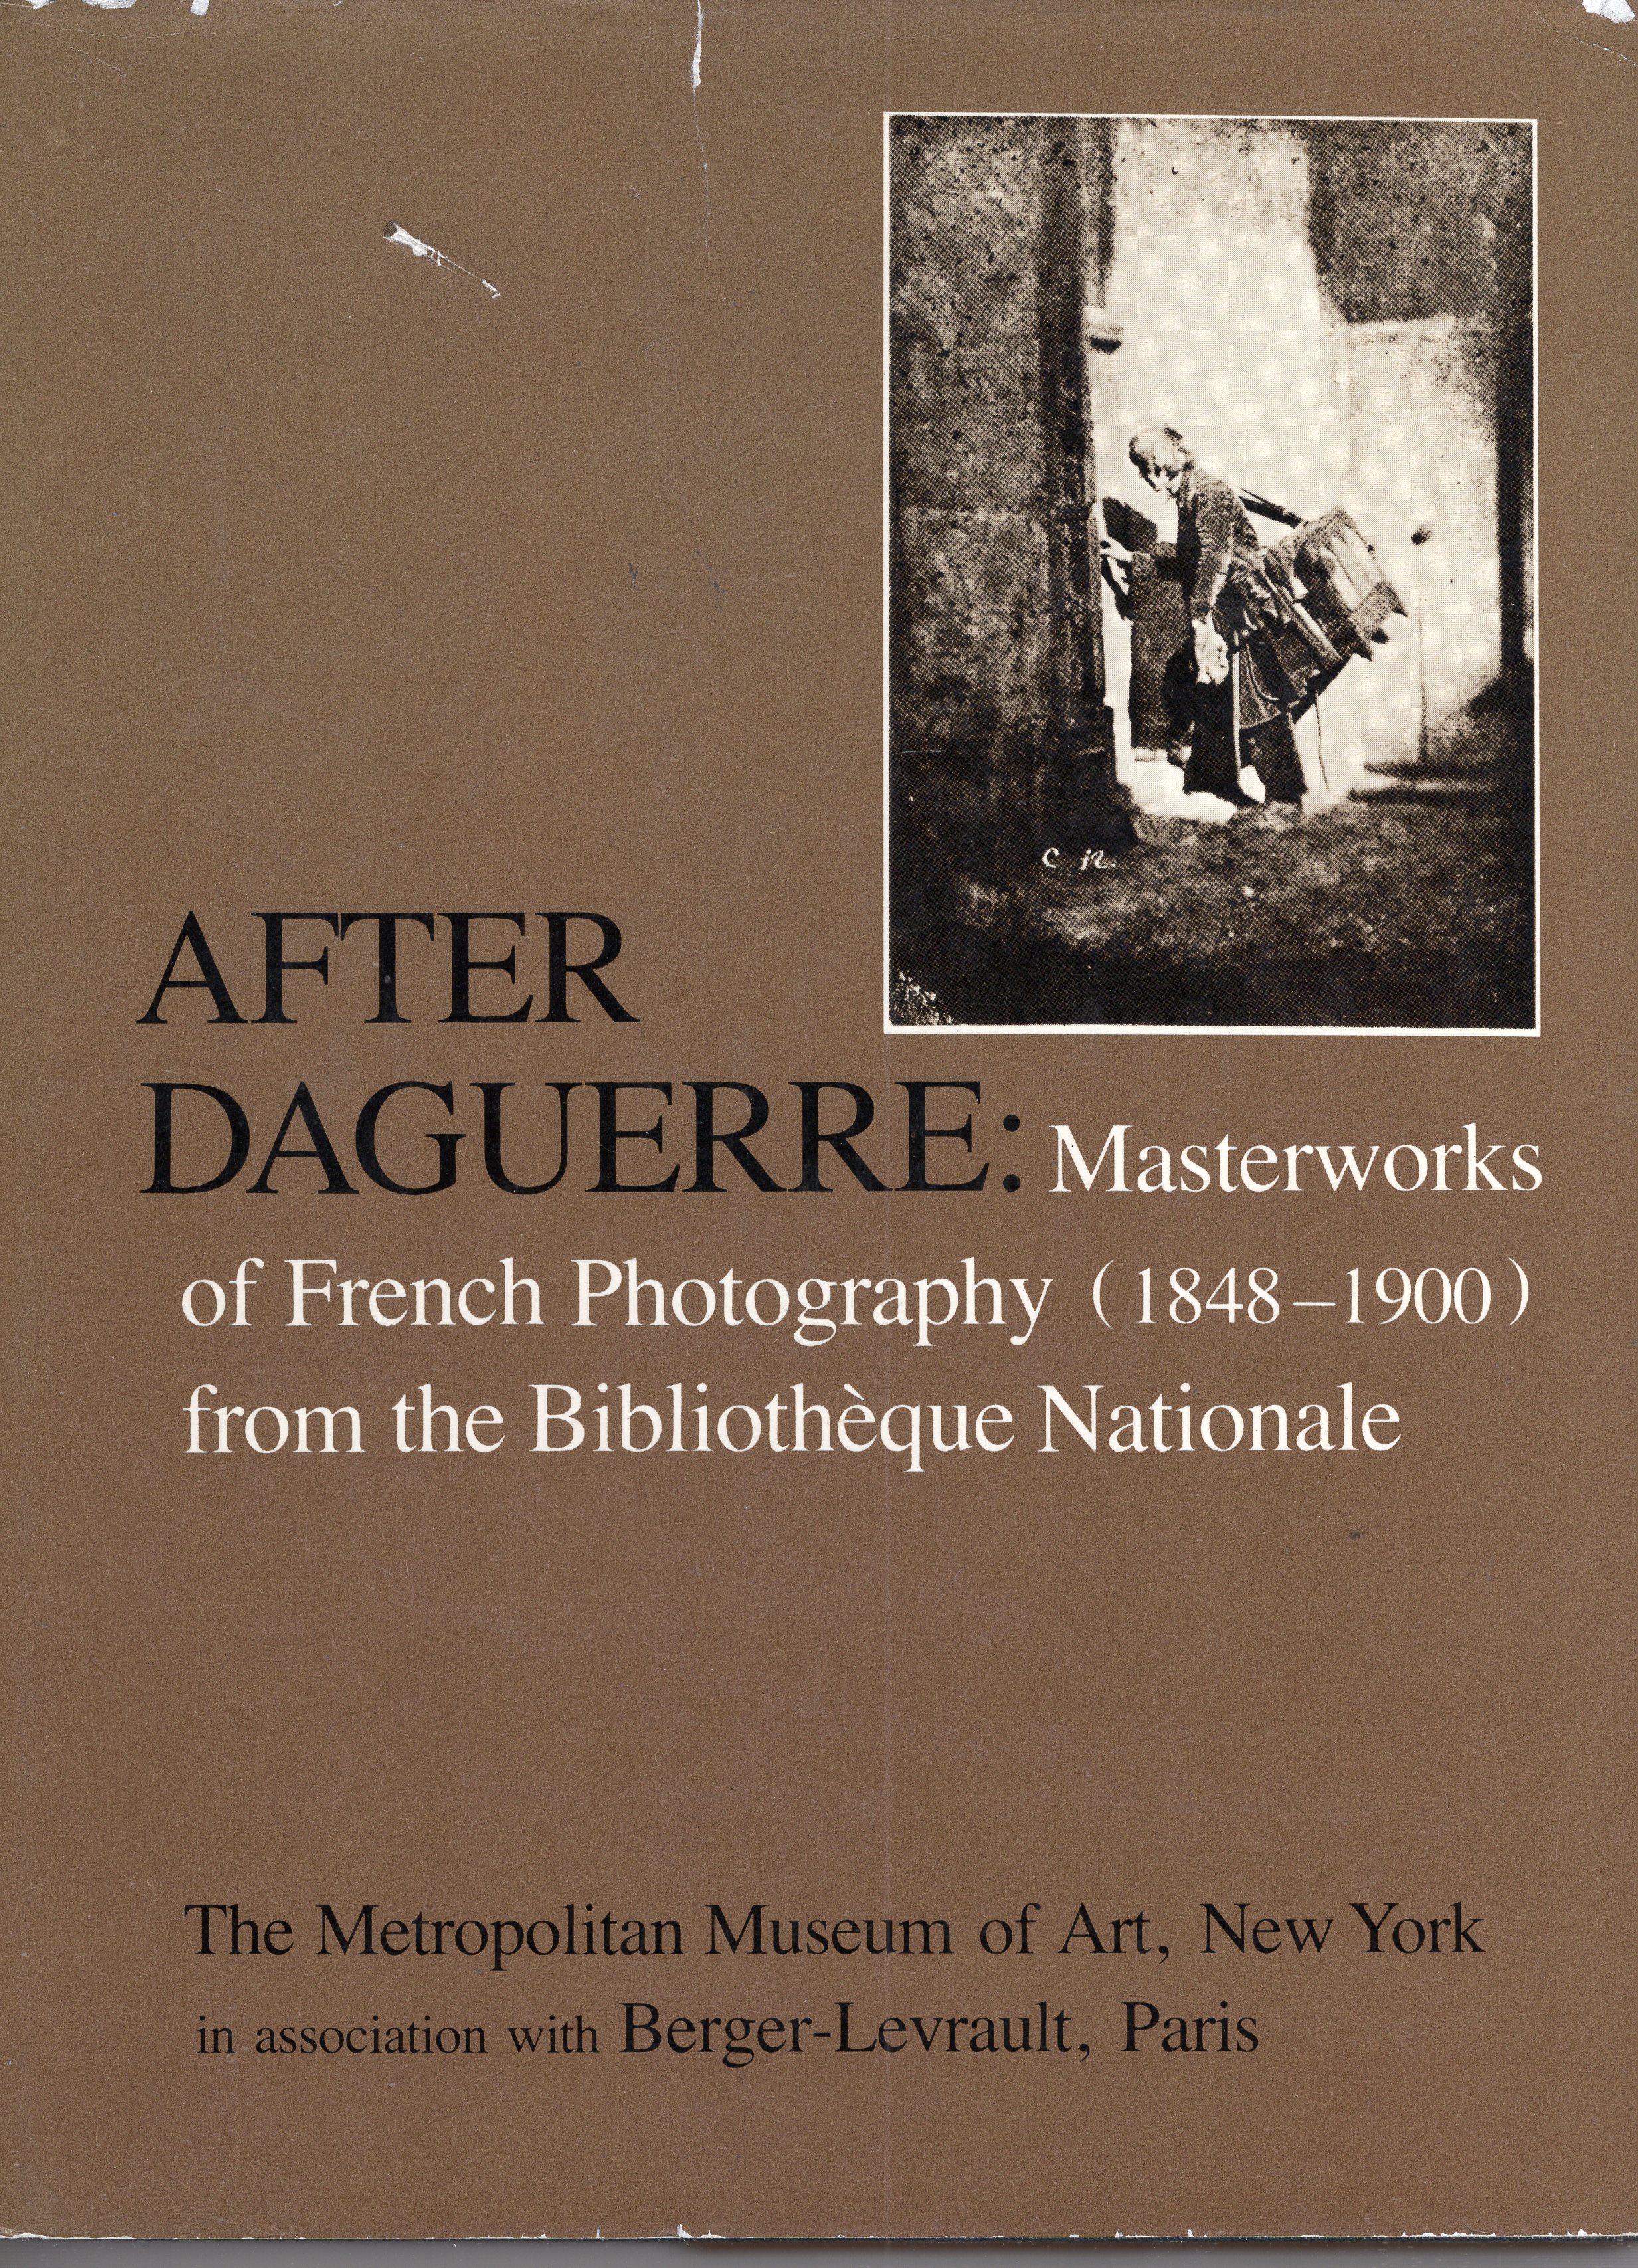  - After Daguerre: Masterworks of French Photography (1848-1900) from the Bibliothque Nationale.